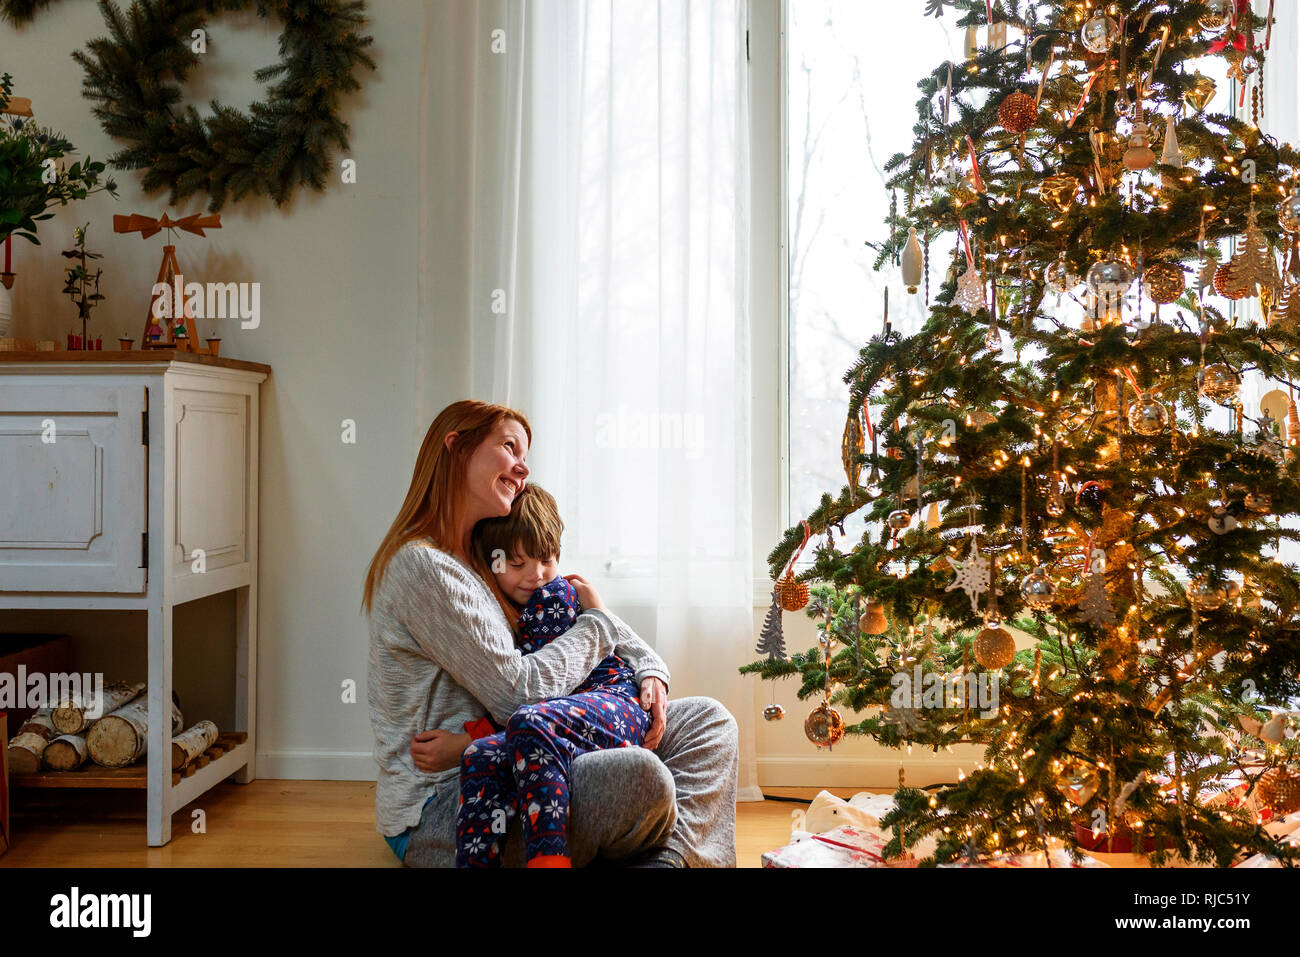 Woman sitting by a Christmas tree hugging her son Stock Photo